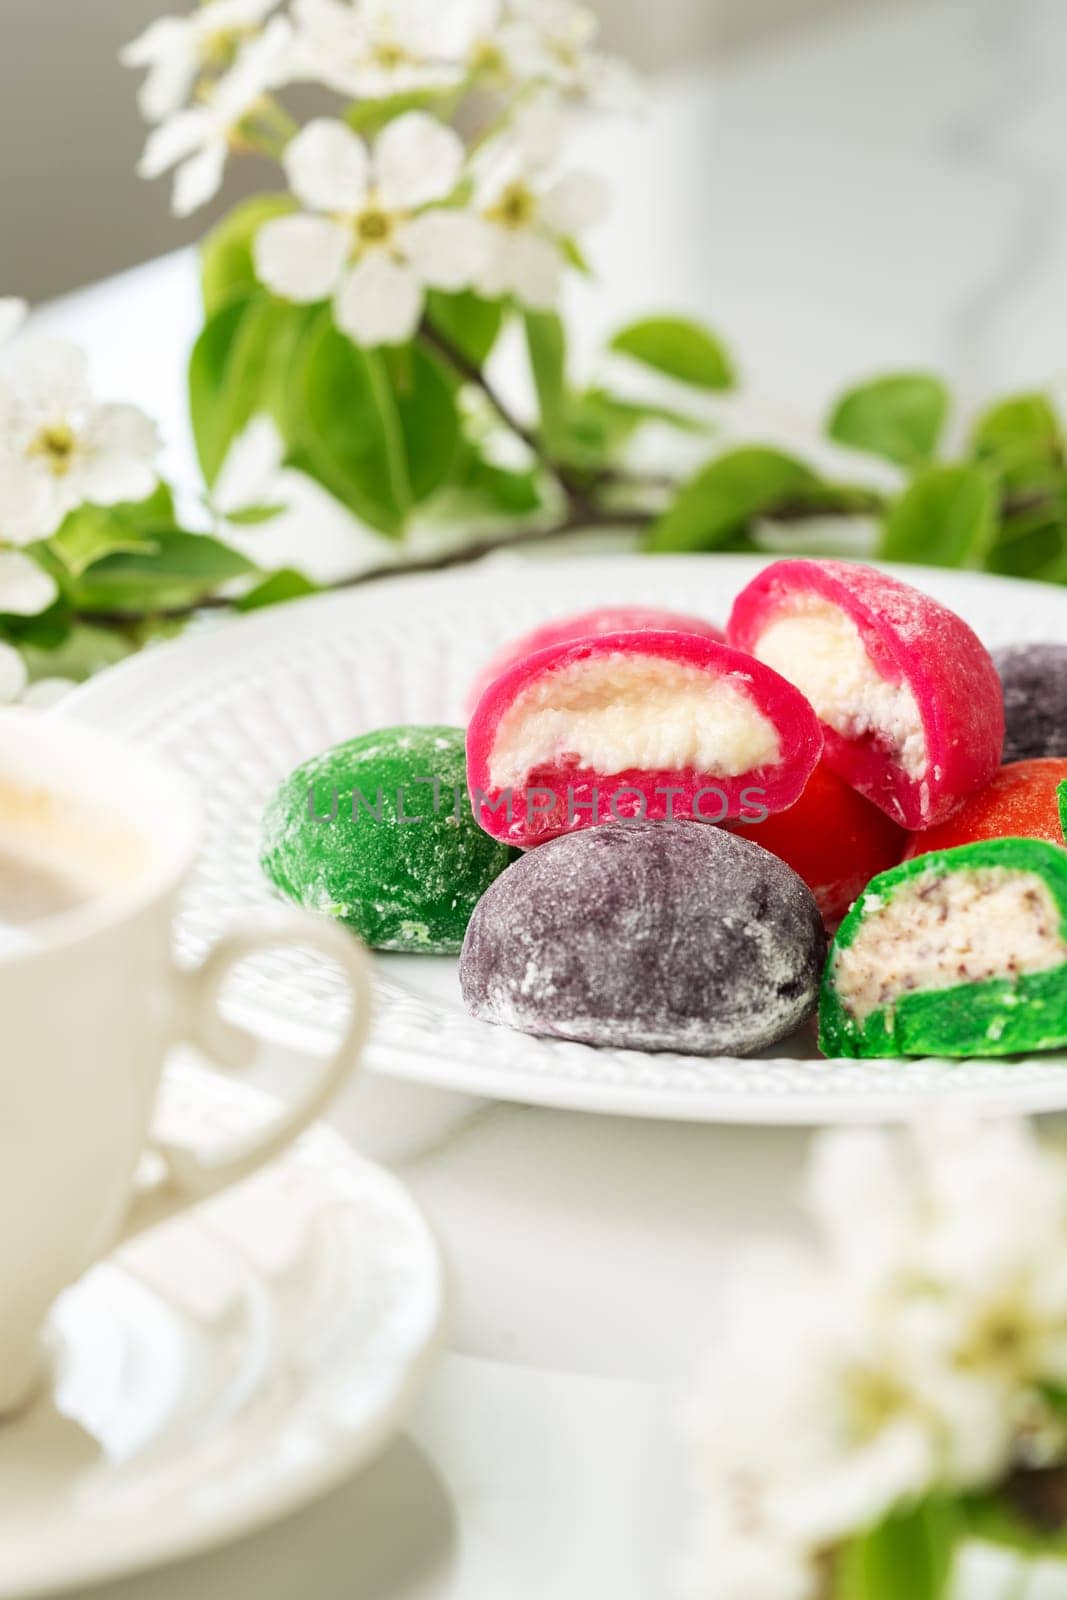 Multi-colored Japanese cakes Mochi in a white plate by Fabrikasimf